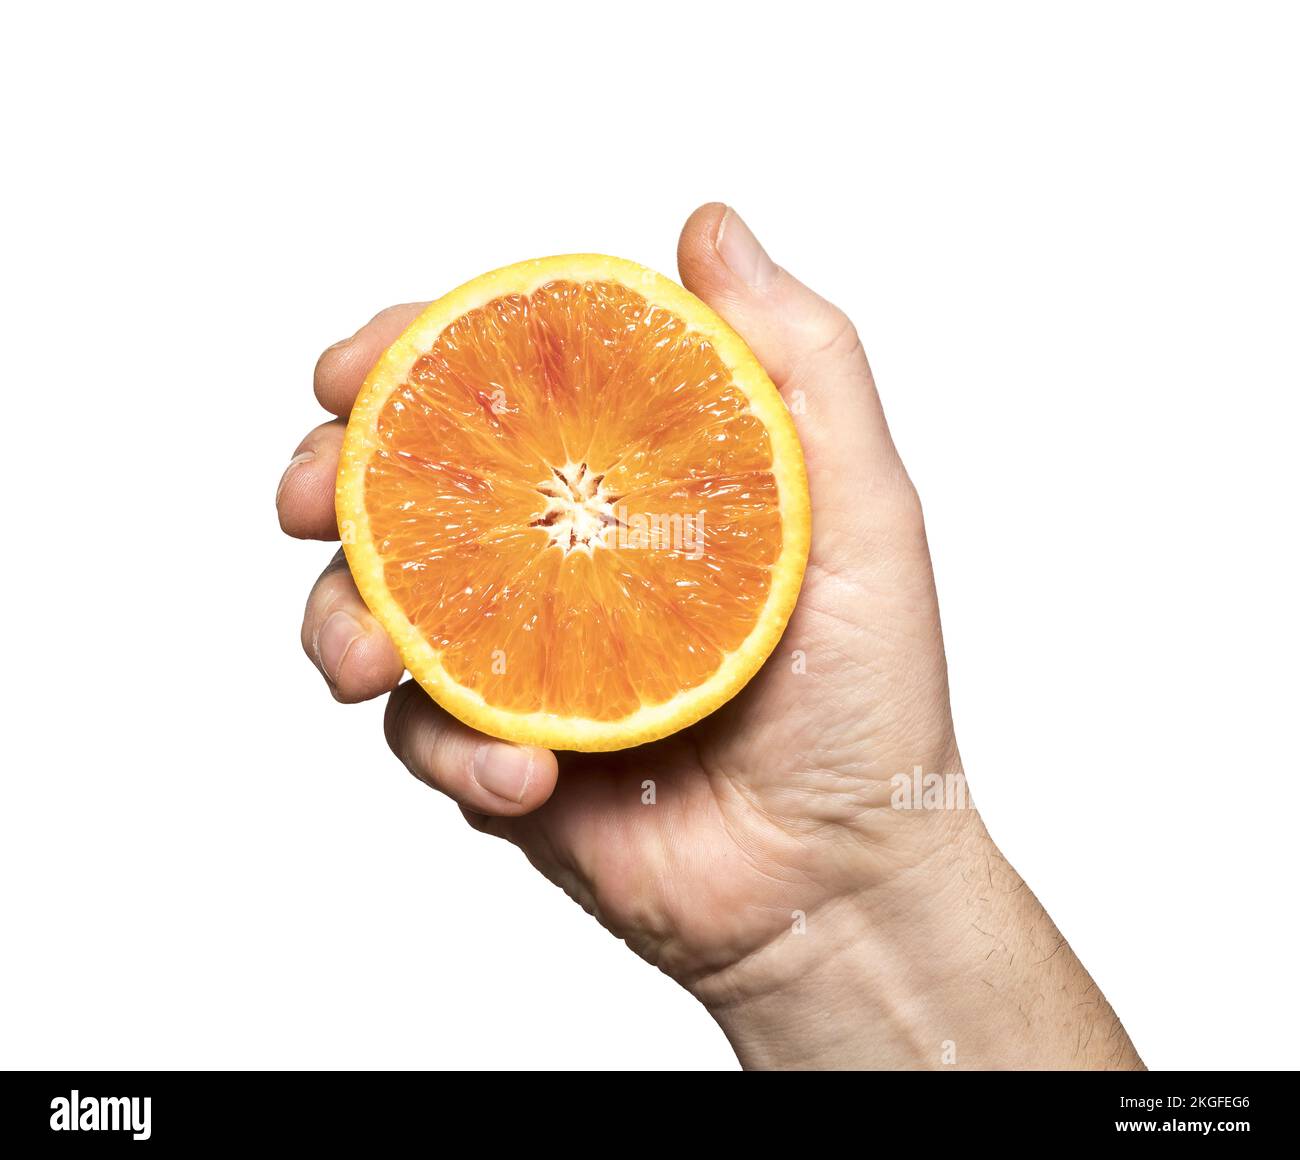 a cut orange in hand on a transparent background Stock Photo